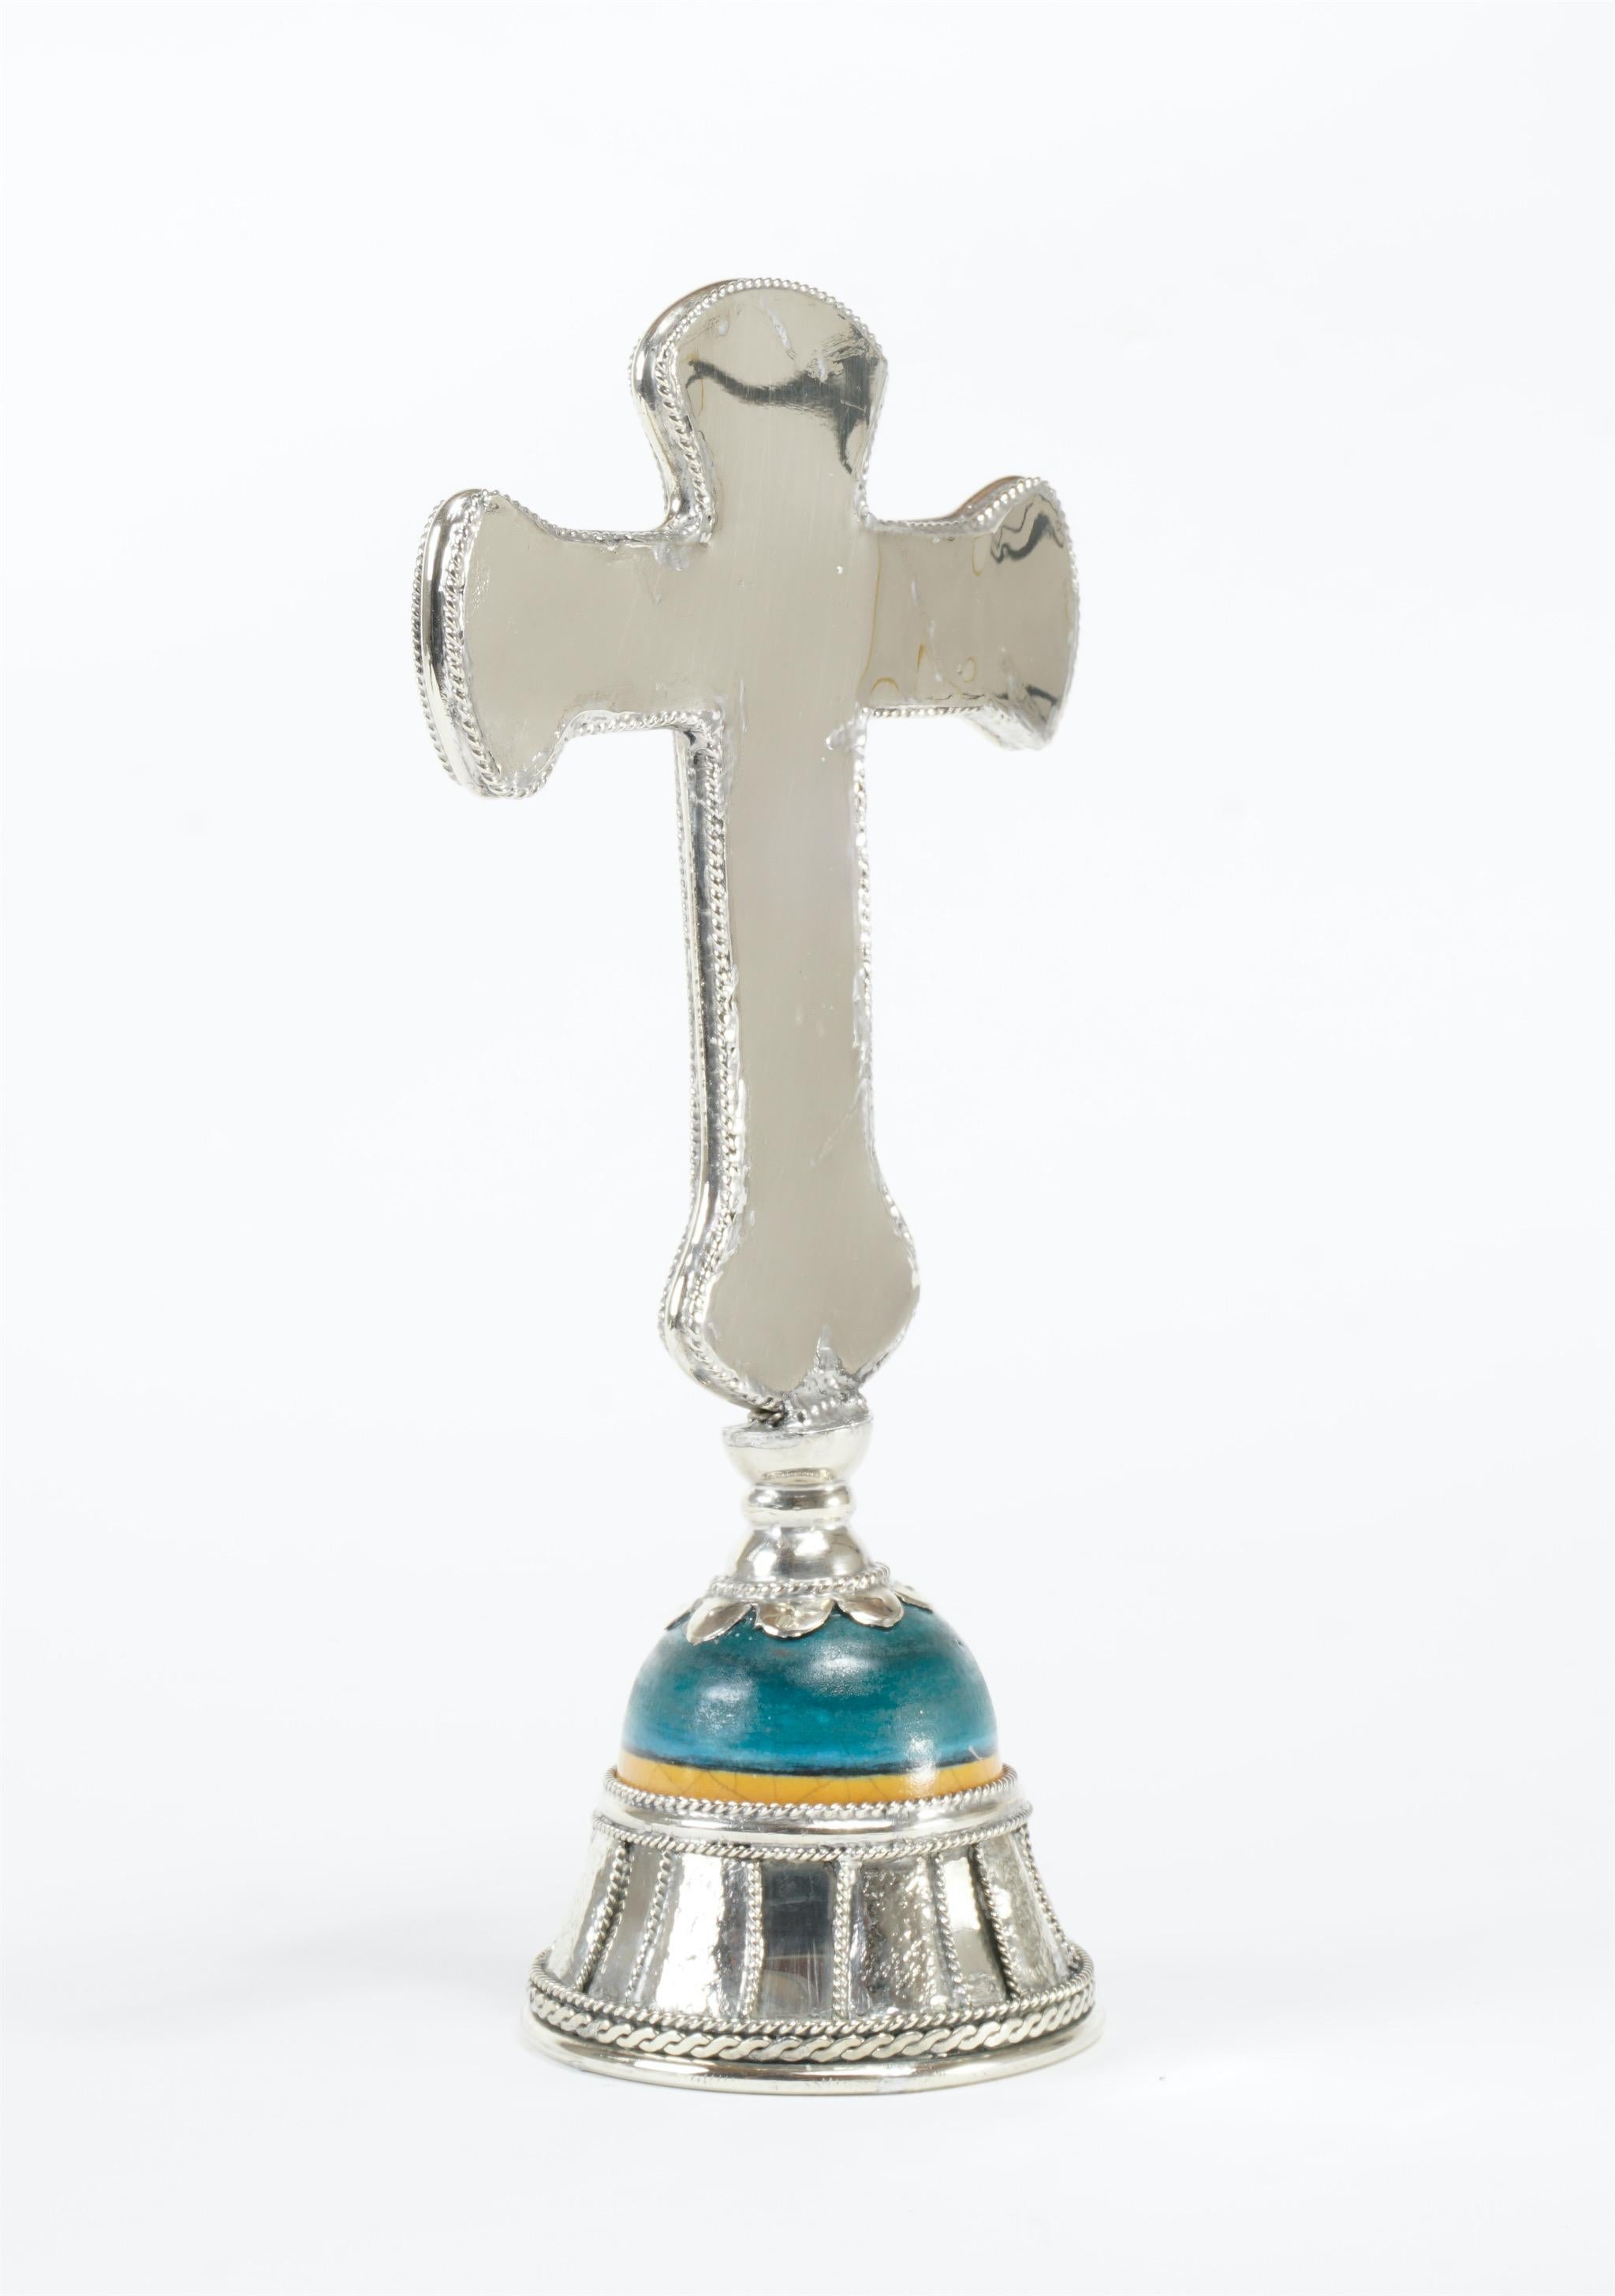 Mexican Ceramic and White Metal 'Alpaca' Crucifix with Cerámic Corpus of Christ